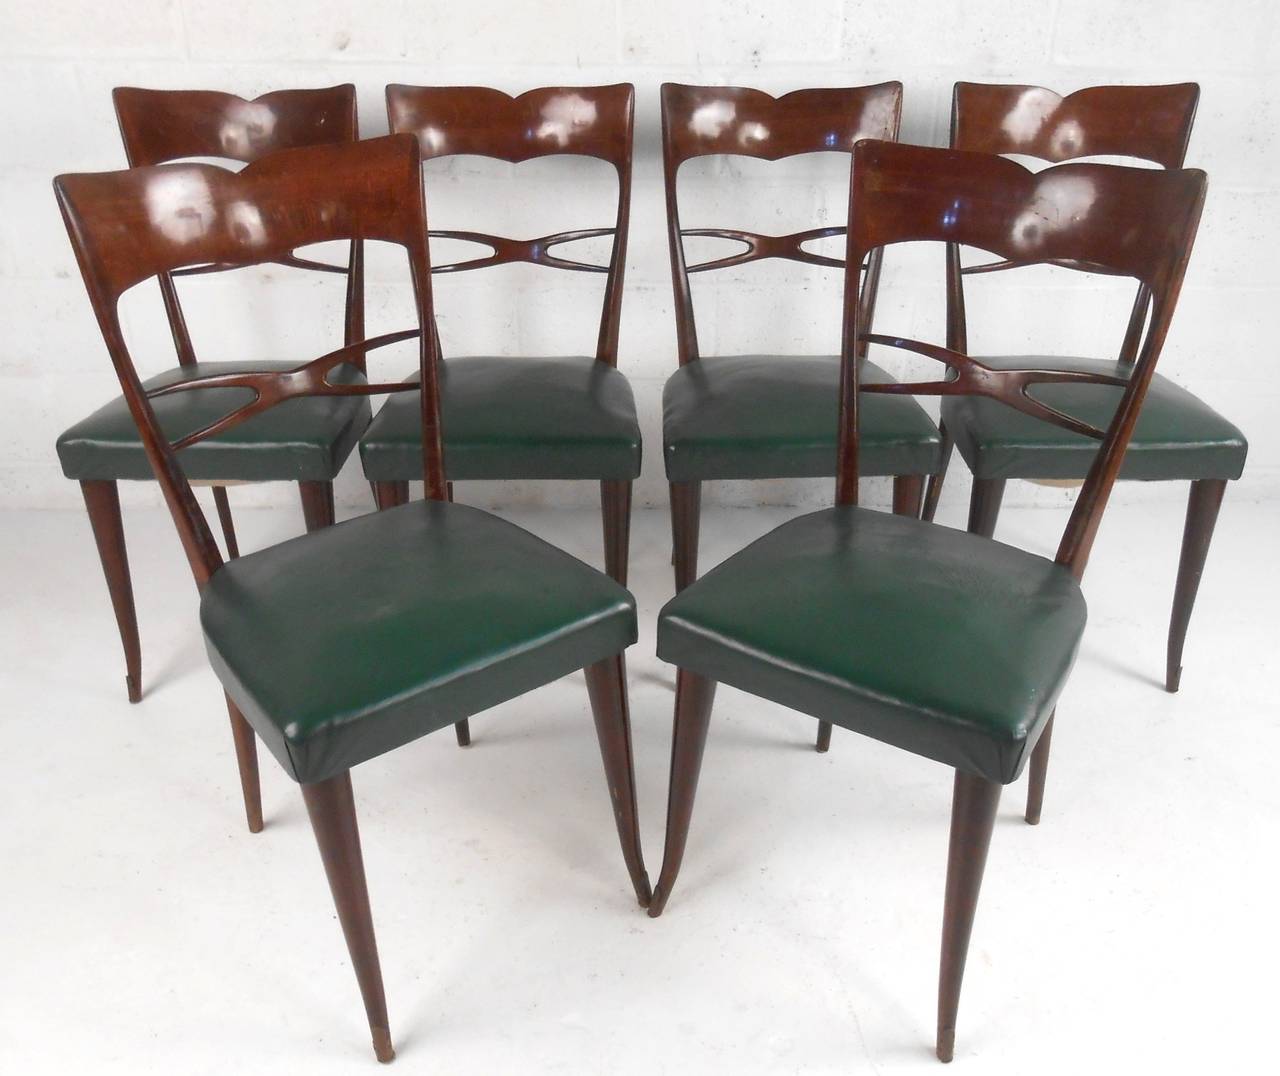 This set of six mahogany dining chairs feature gorgeous design and are the perfect addition to any modern dining room. Please confirm item location (NY or NJ).